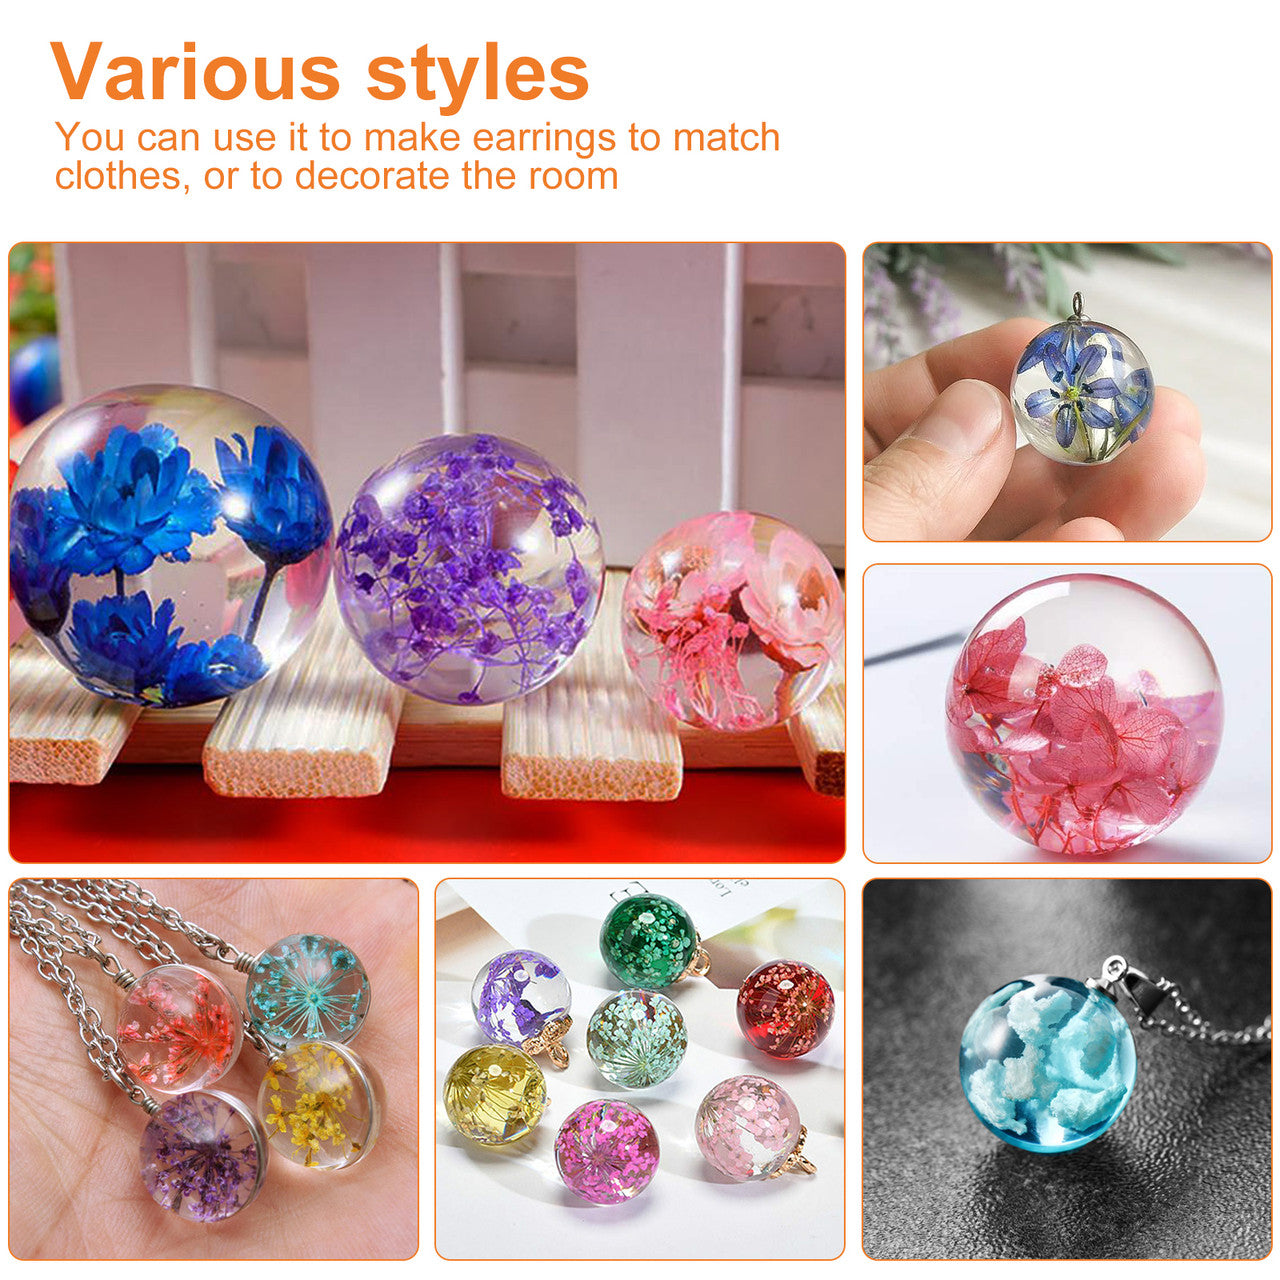 Round Epoxy Resin Ball Molds for Jewelry Making, Homemade Soap, Candle DIY, Bath Bomb, A set of 5 Size